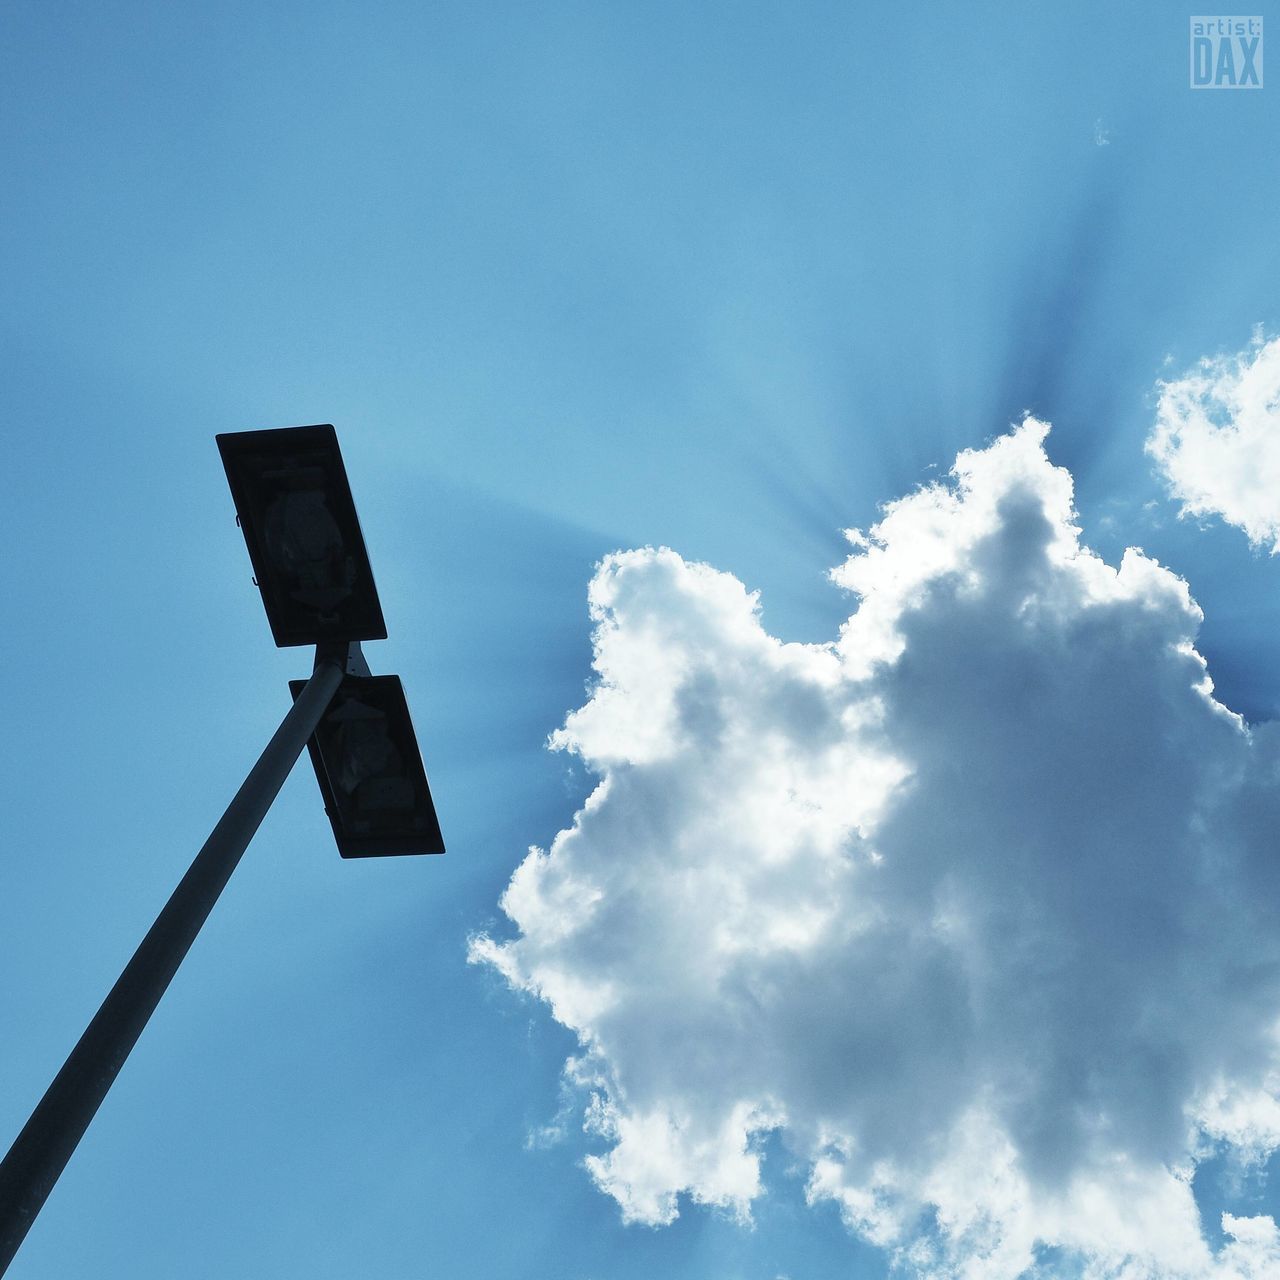 low angle view, sky, blue, cloud - sky, street light, lighting equipment, cloud, nature, outdoors, no people, day, pole, silhouette, copy space, beauty in nature, guidance, tranquility, cloudy, high section, sunlight